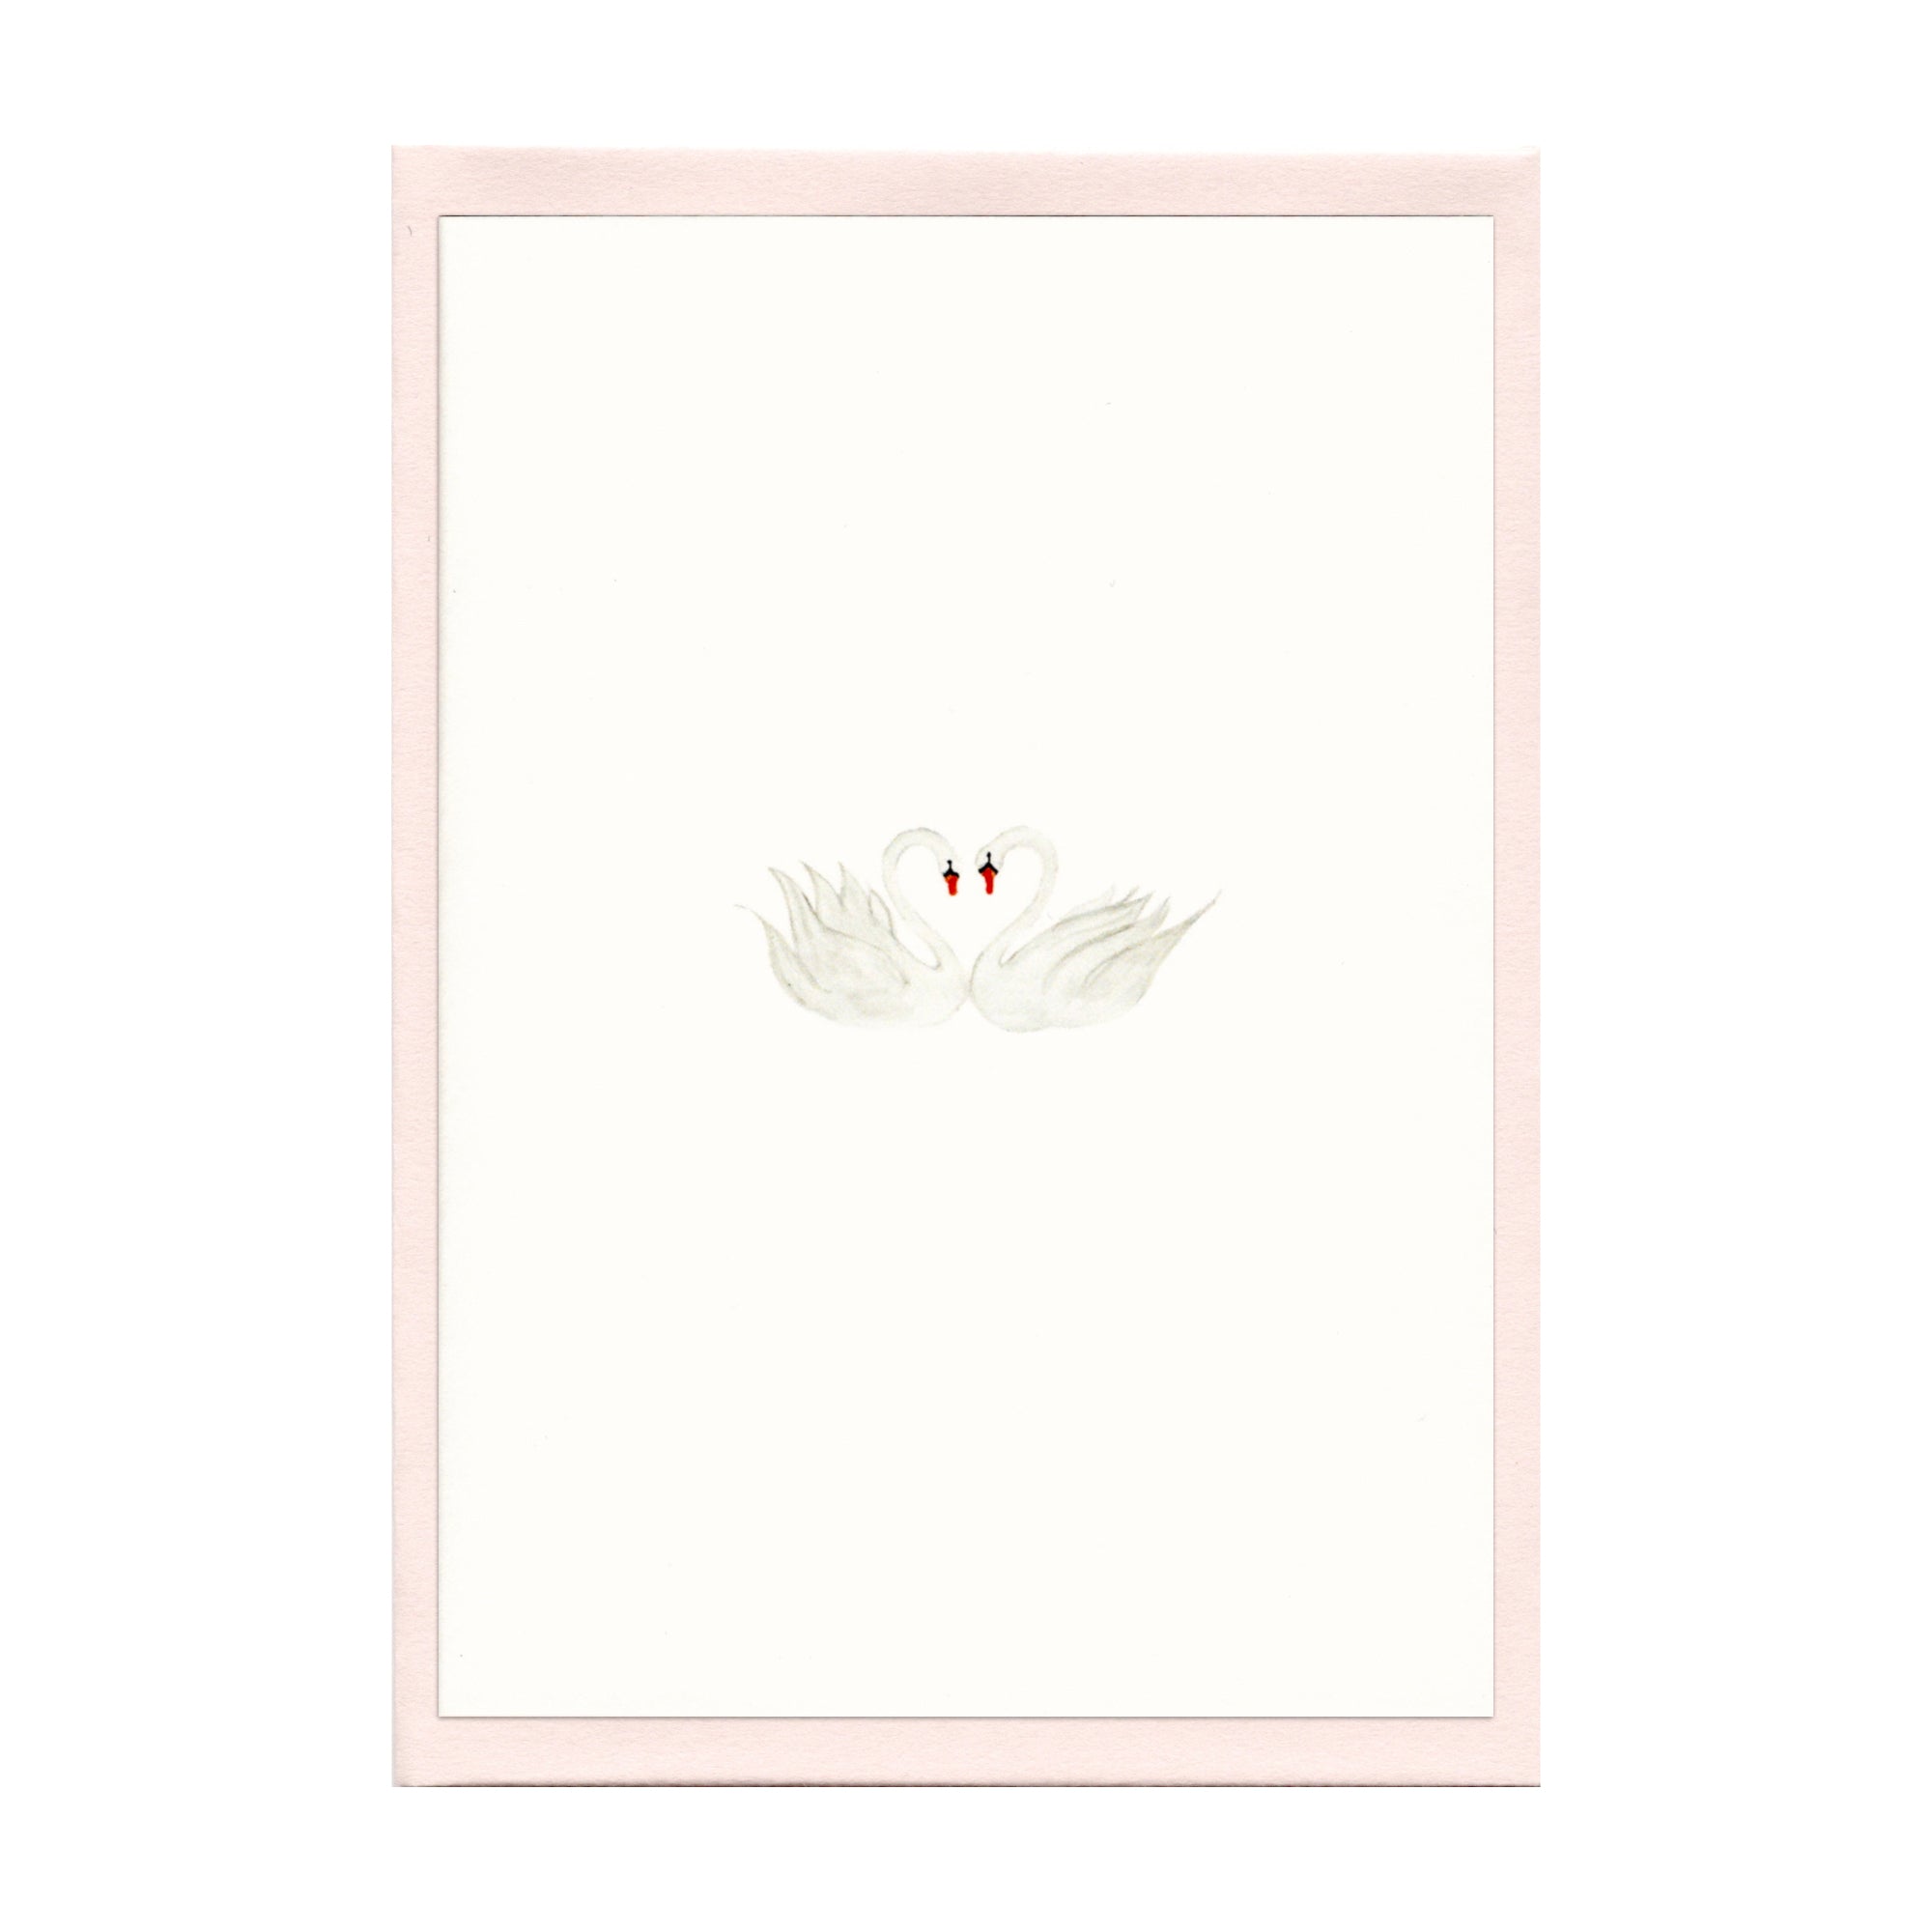 Pack of 5 St. Valentine's Day Cards